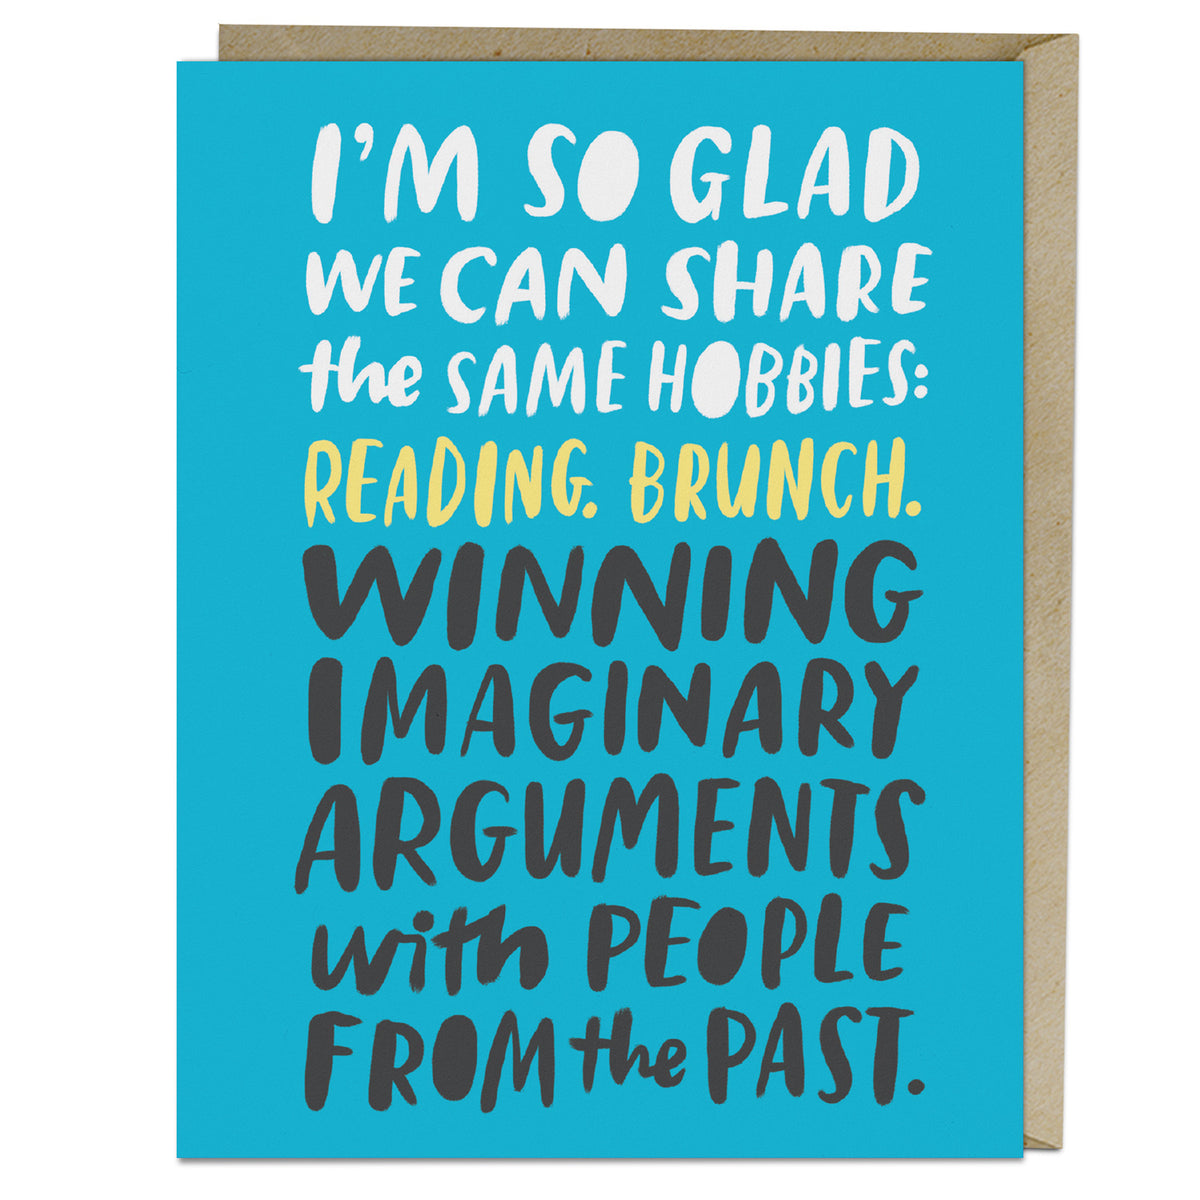 Imaginary Arguments from the Past Card 